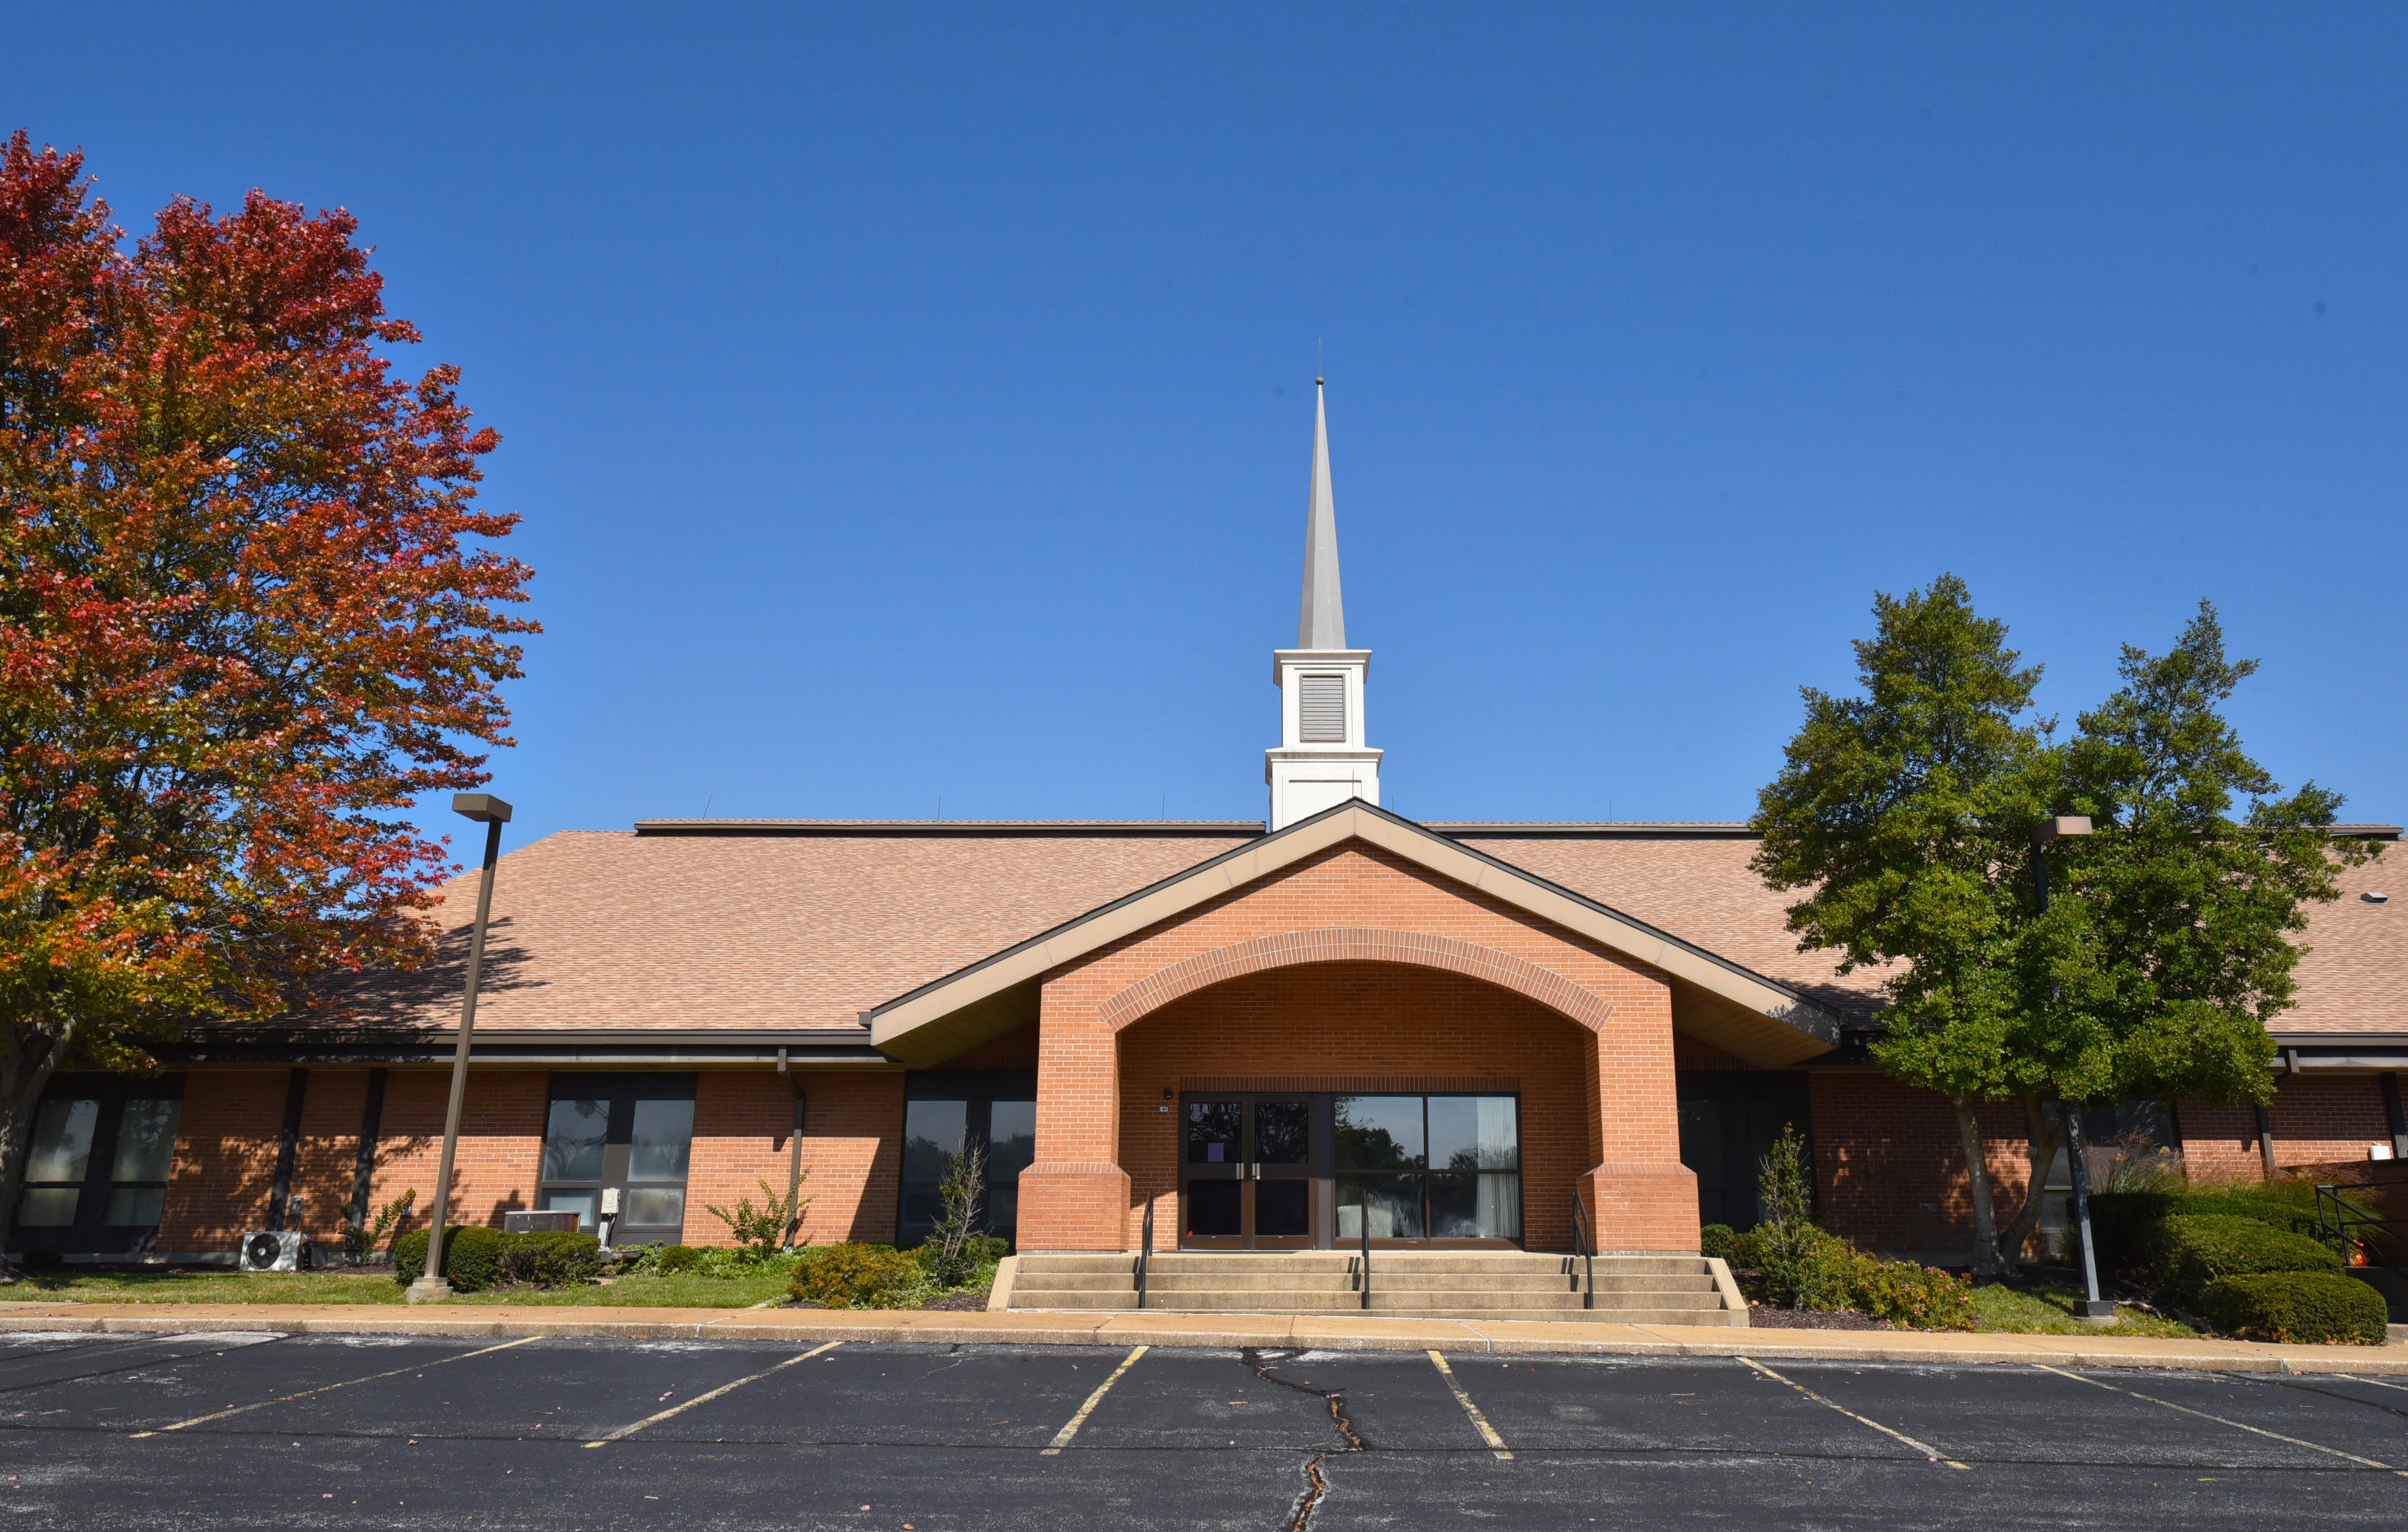 Image 3 | The Church of Jesus Christ of Latter-day Saints